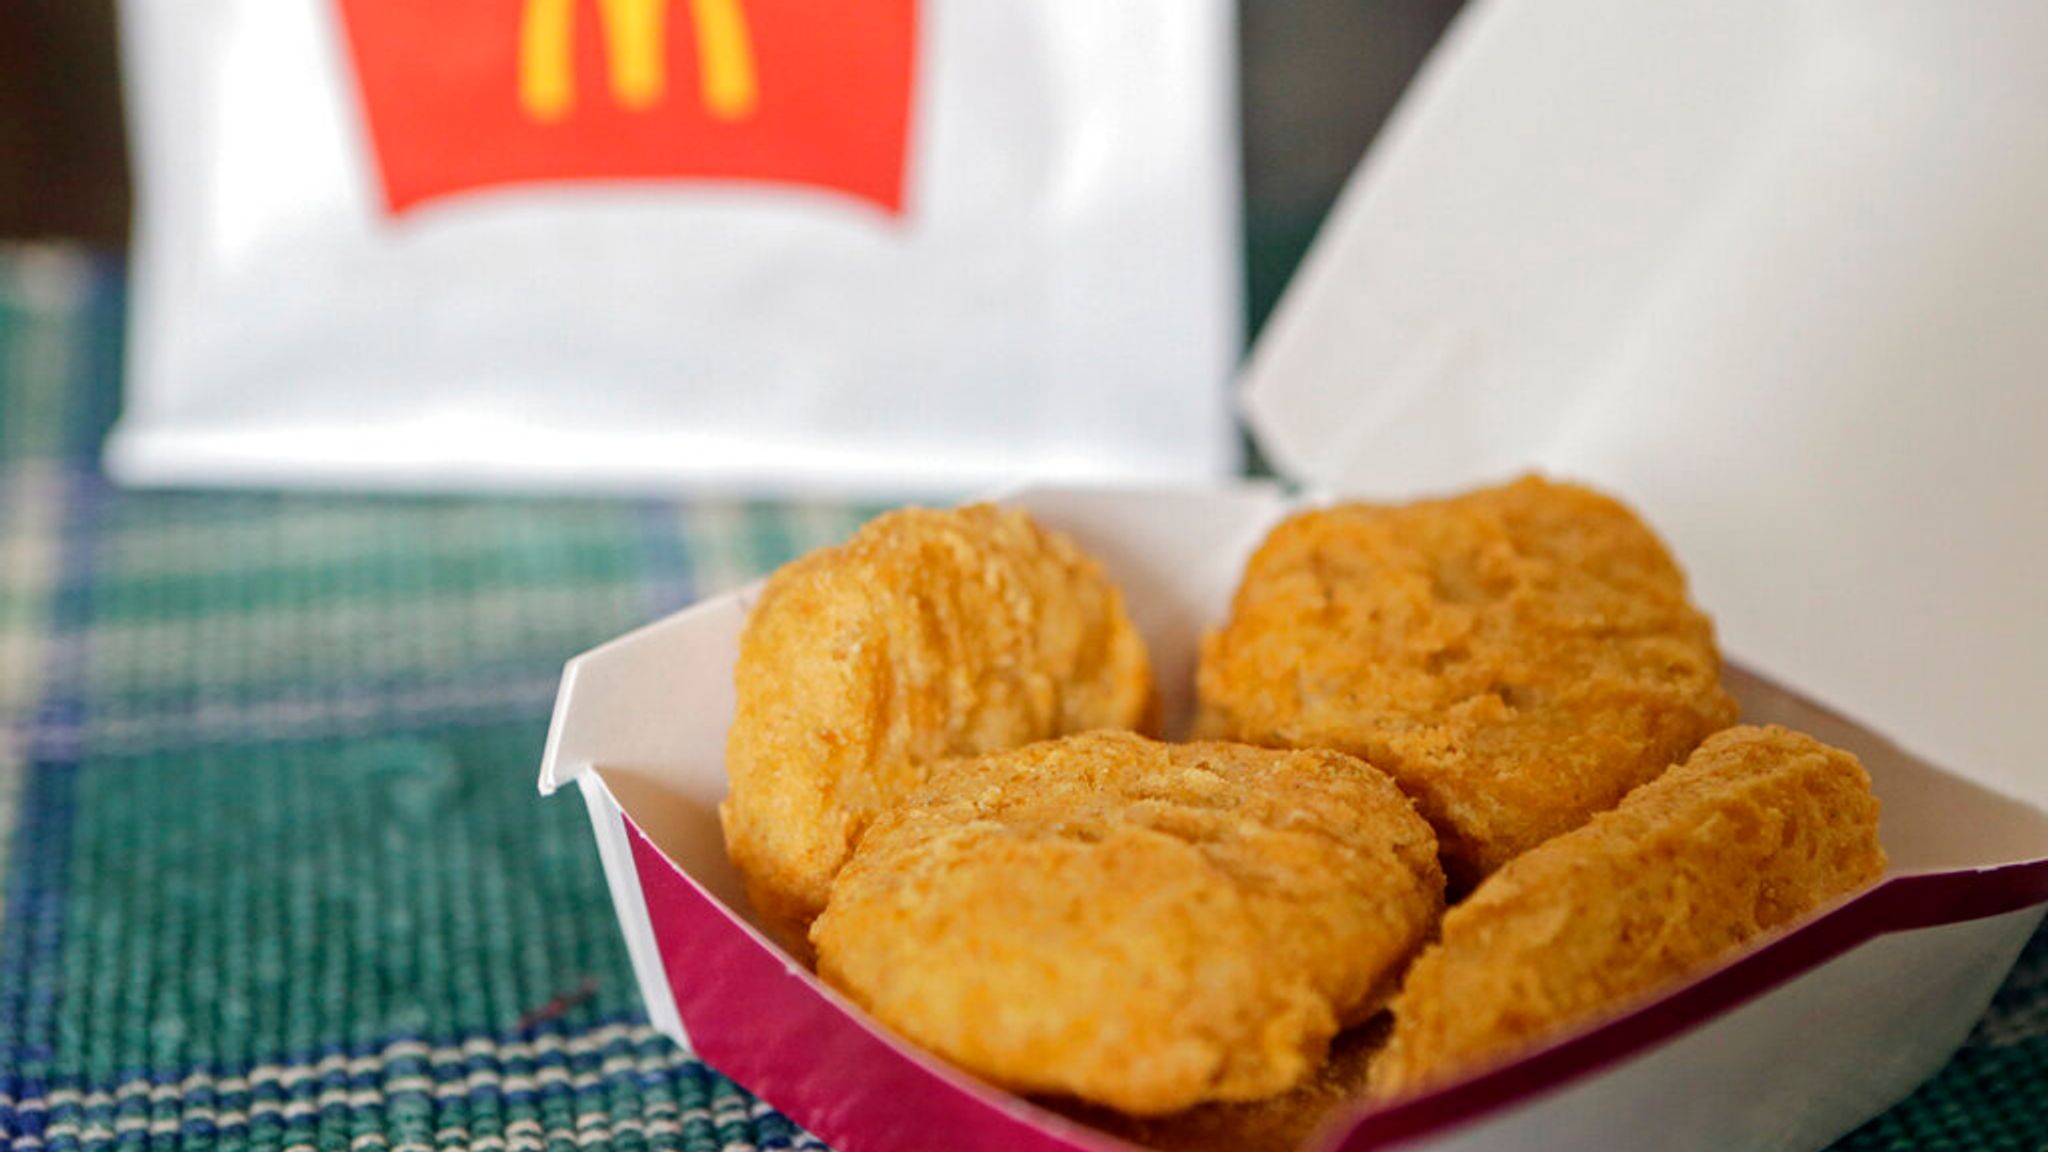 How to Determine How Much are 20 pc McNuggets?